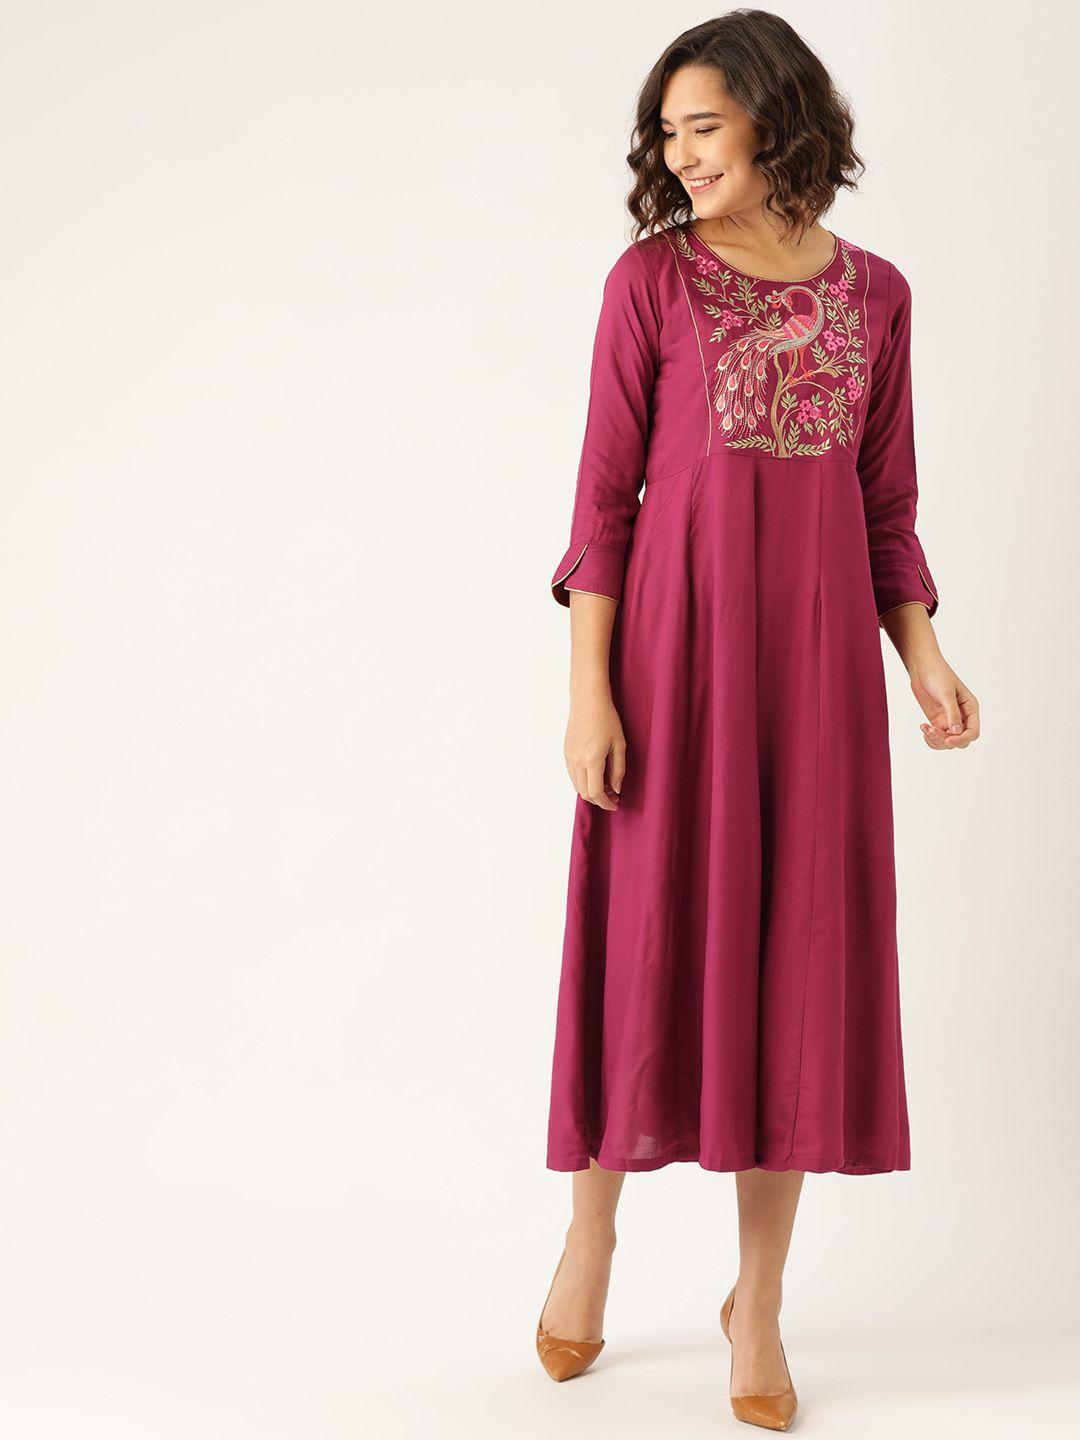 shae by sassafras magenta peacock motif embroidered a-line midi dress